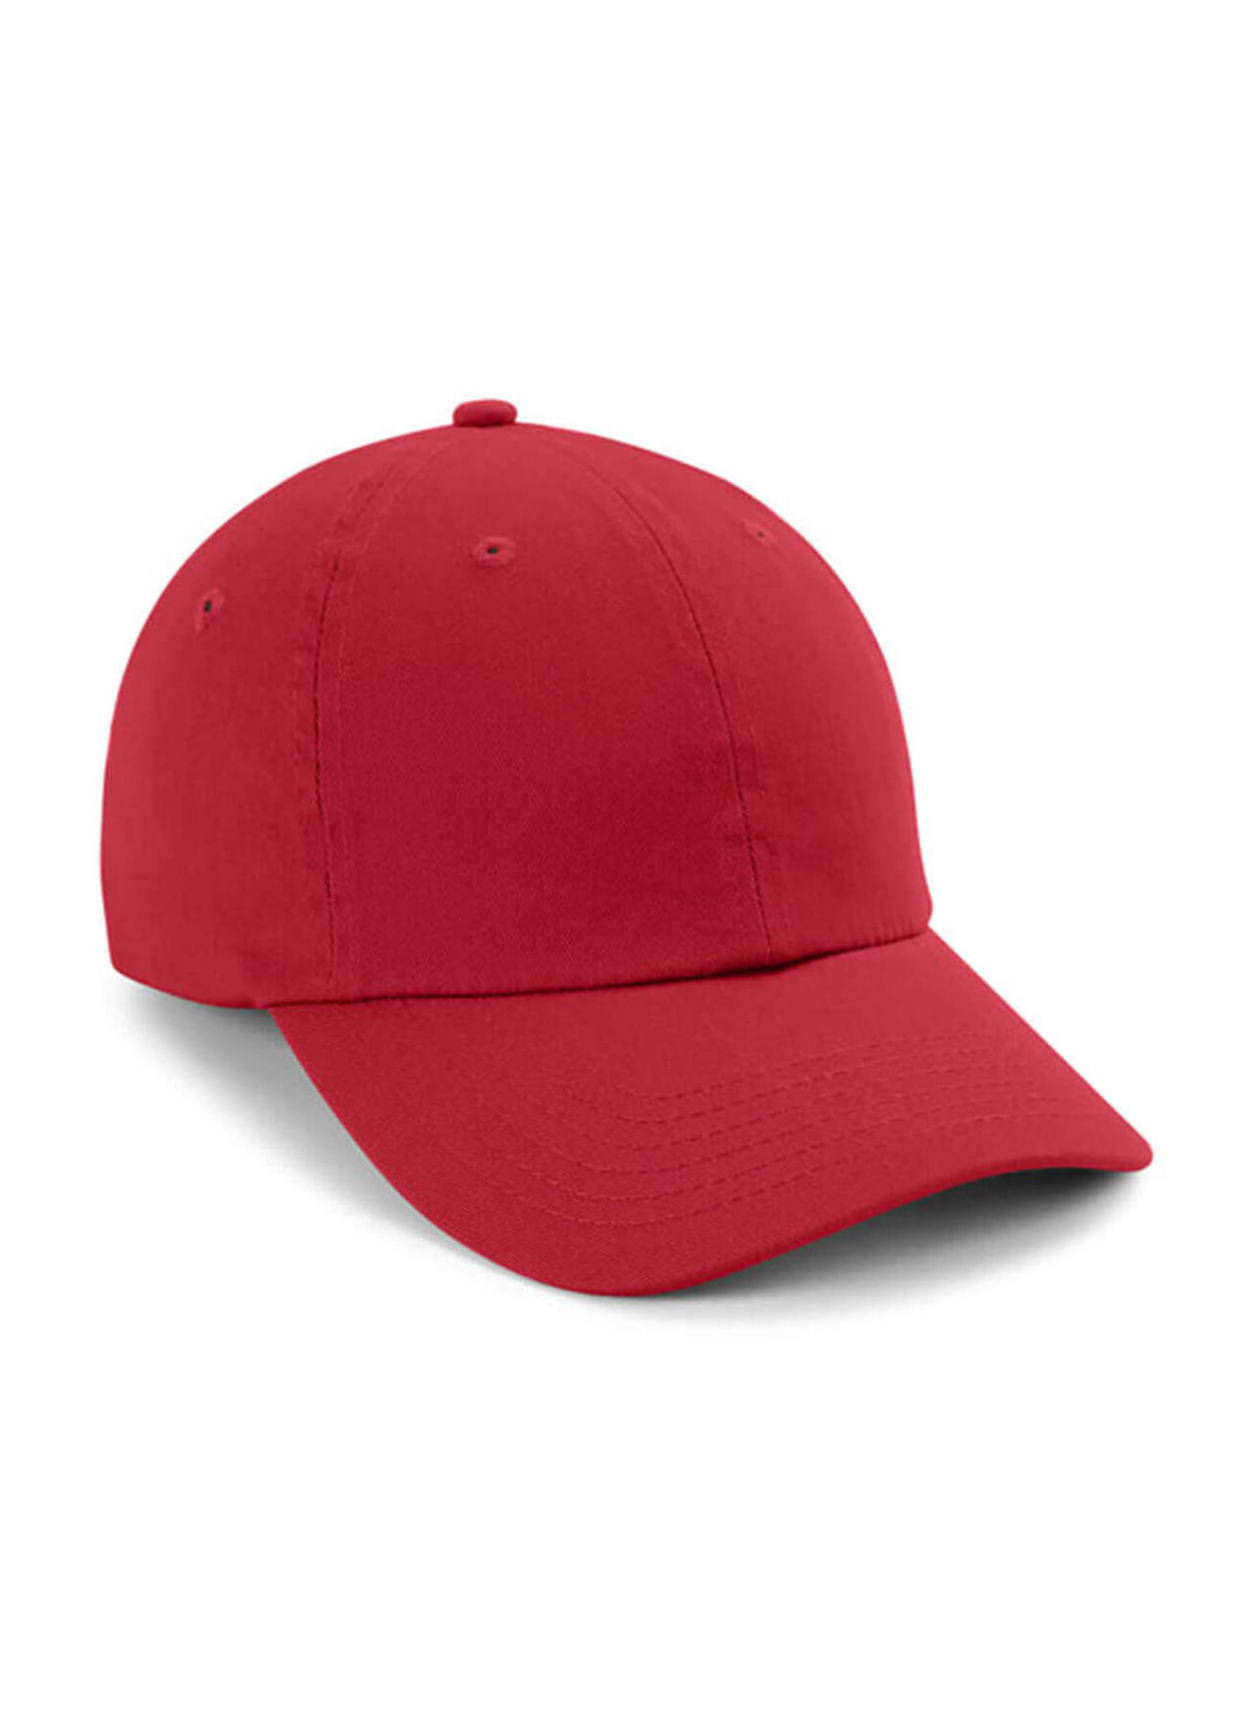 Imperial Red The Original Buckle Hat